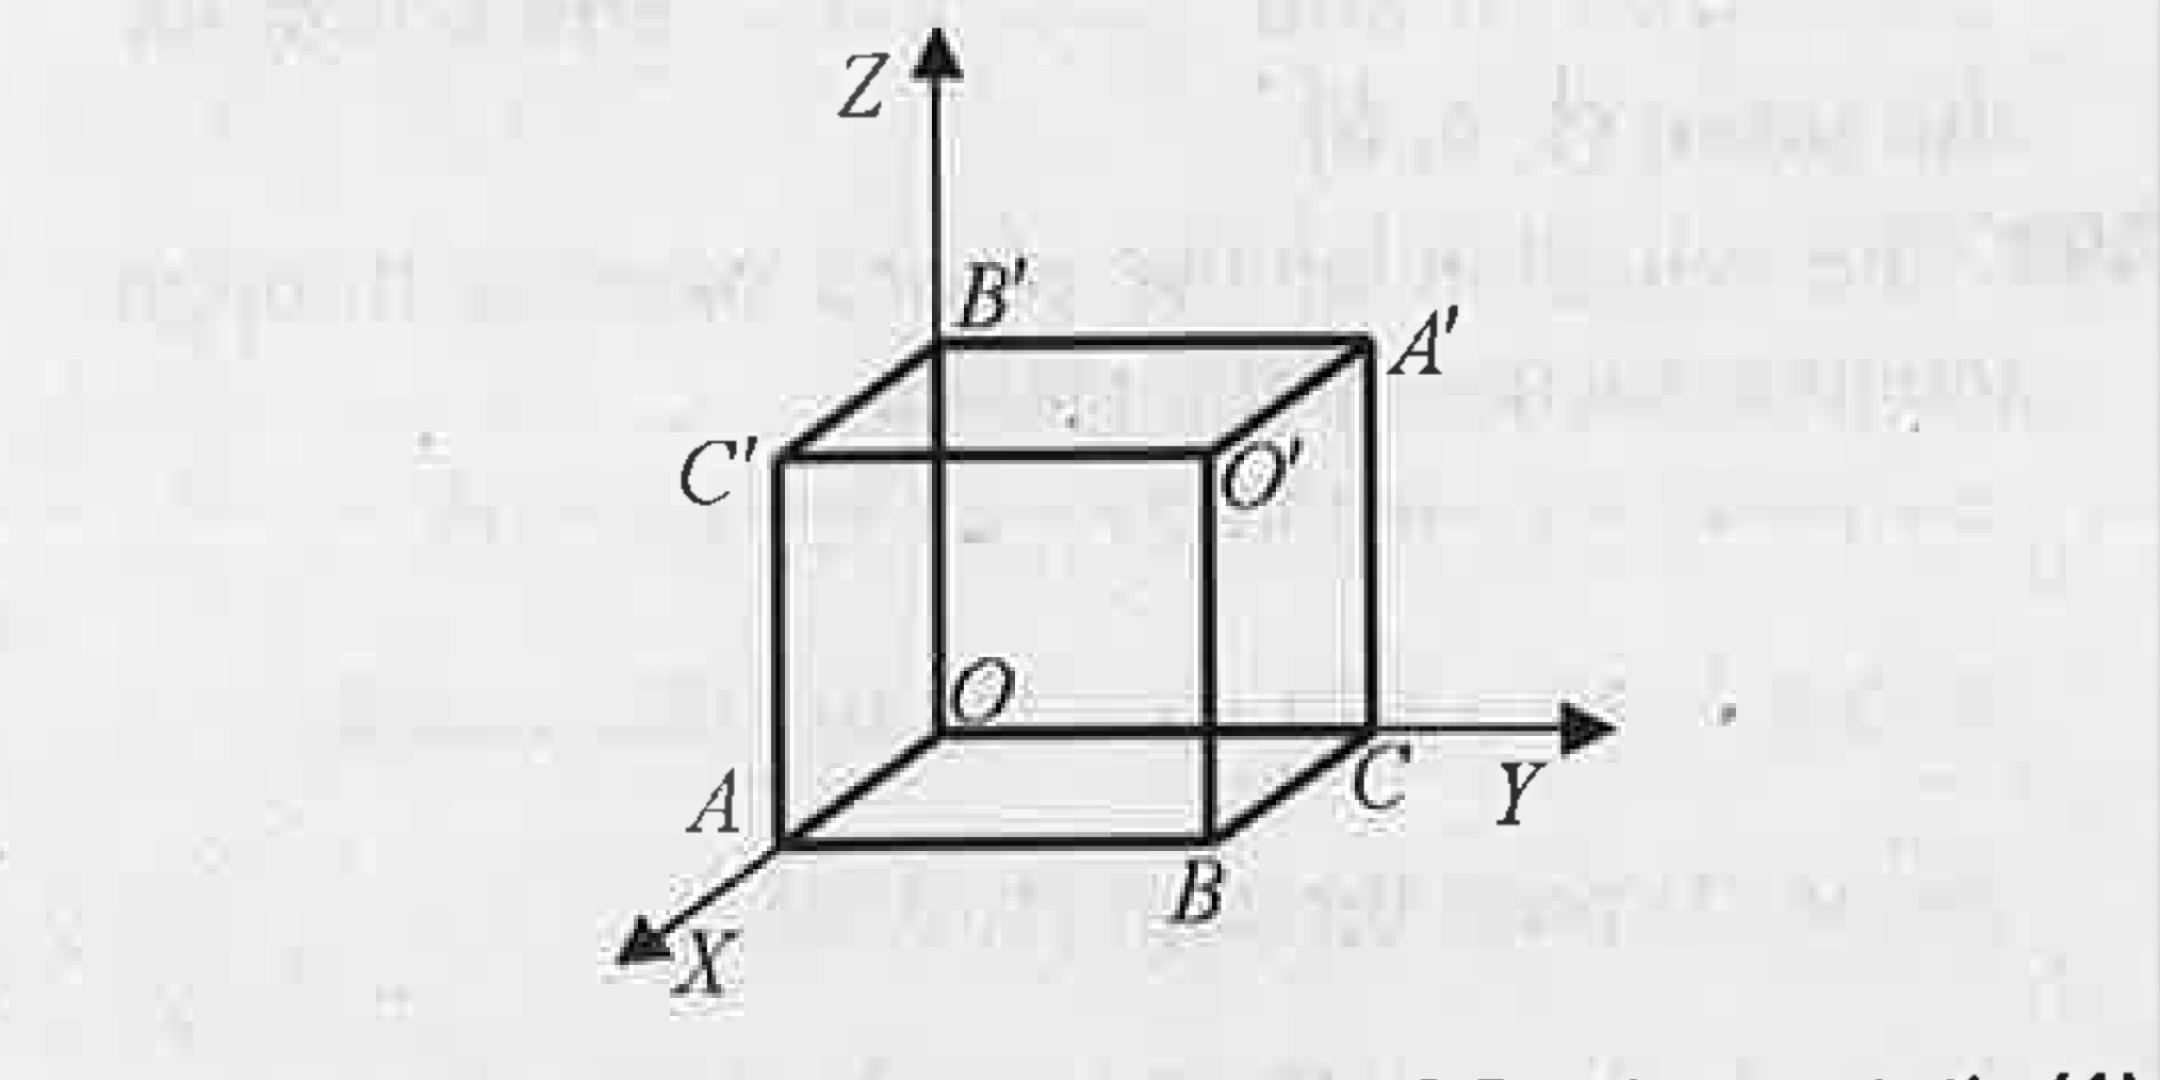 Consider a cube of side 'a' unit has one vertex at the origin O.   Show that the angle between the main diagonals of the above cube is cos^-1(1/3)